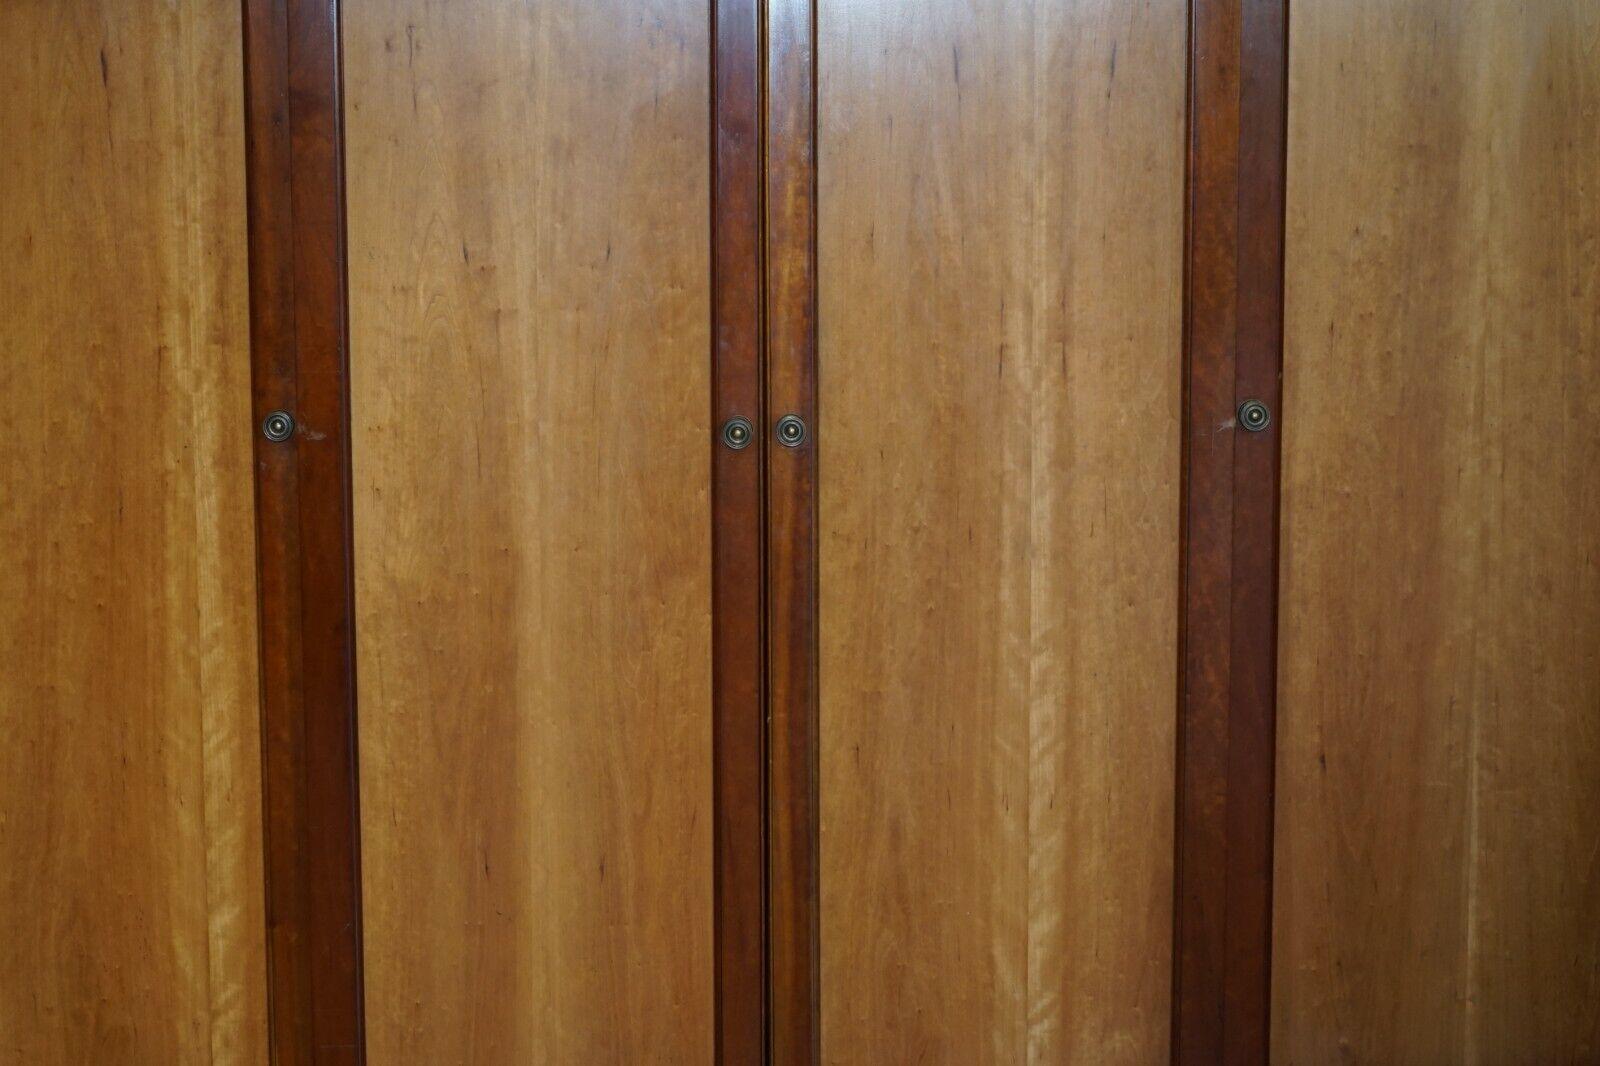 Hand-Crafted Large Triple Cupboard Breakfront Wardrobe in Cherrywood & Walnut + Drawers Base